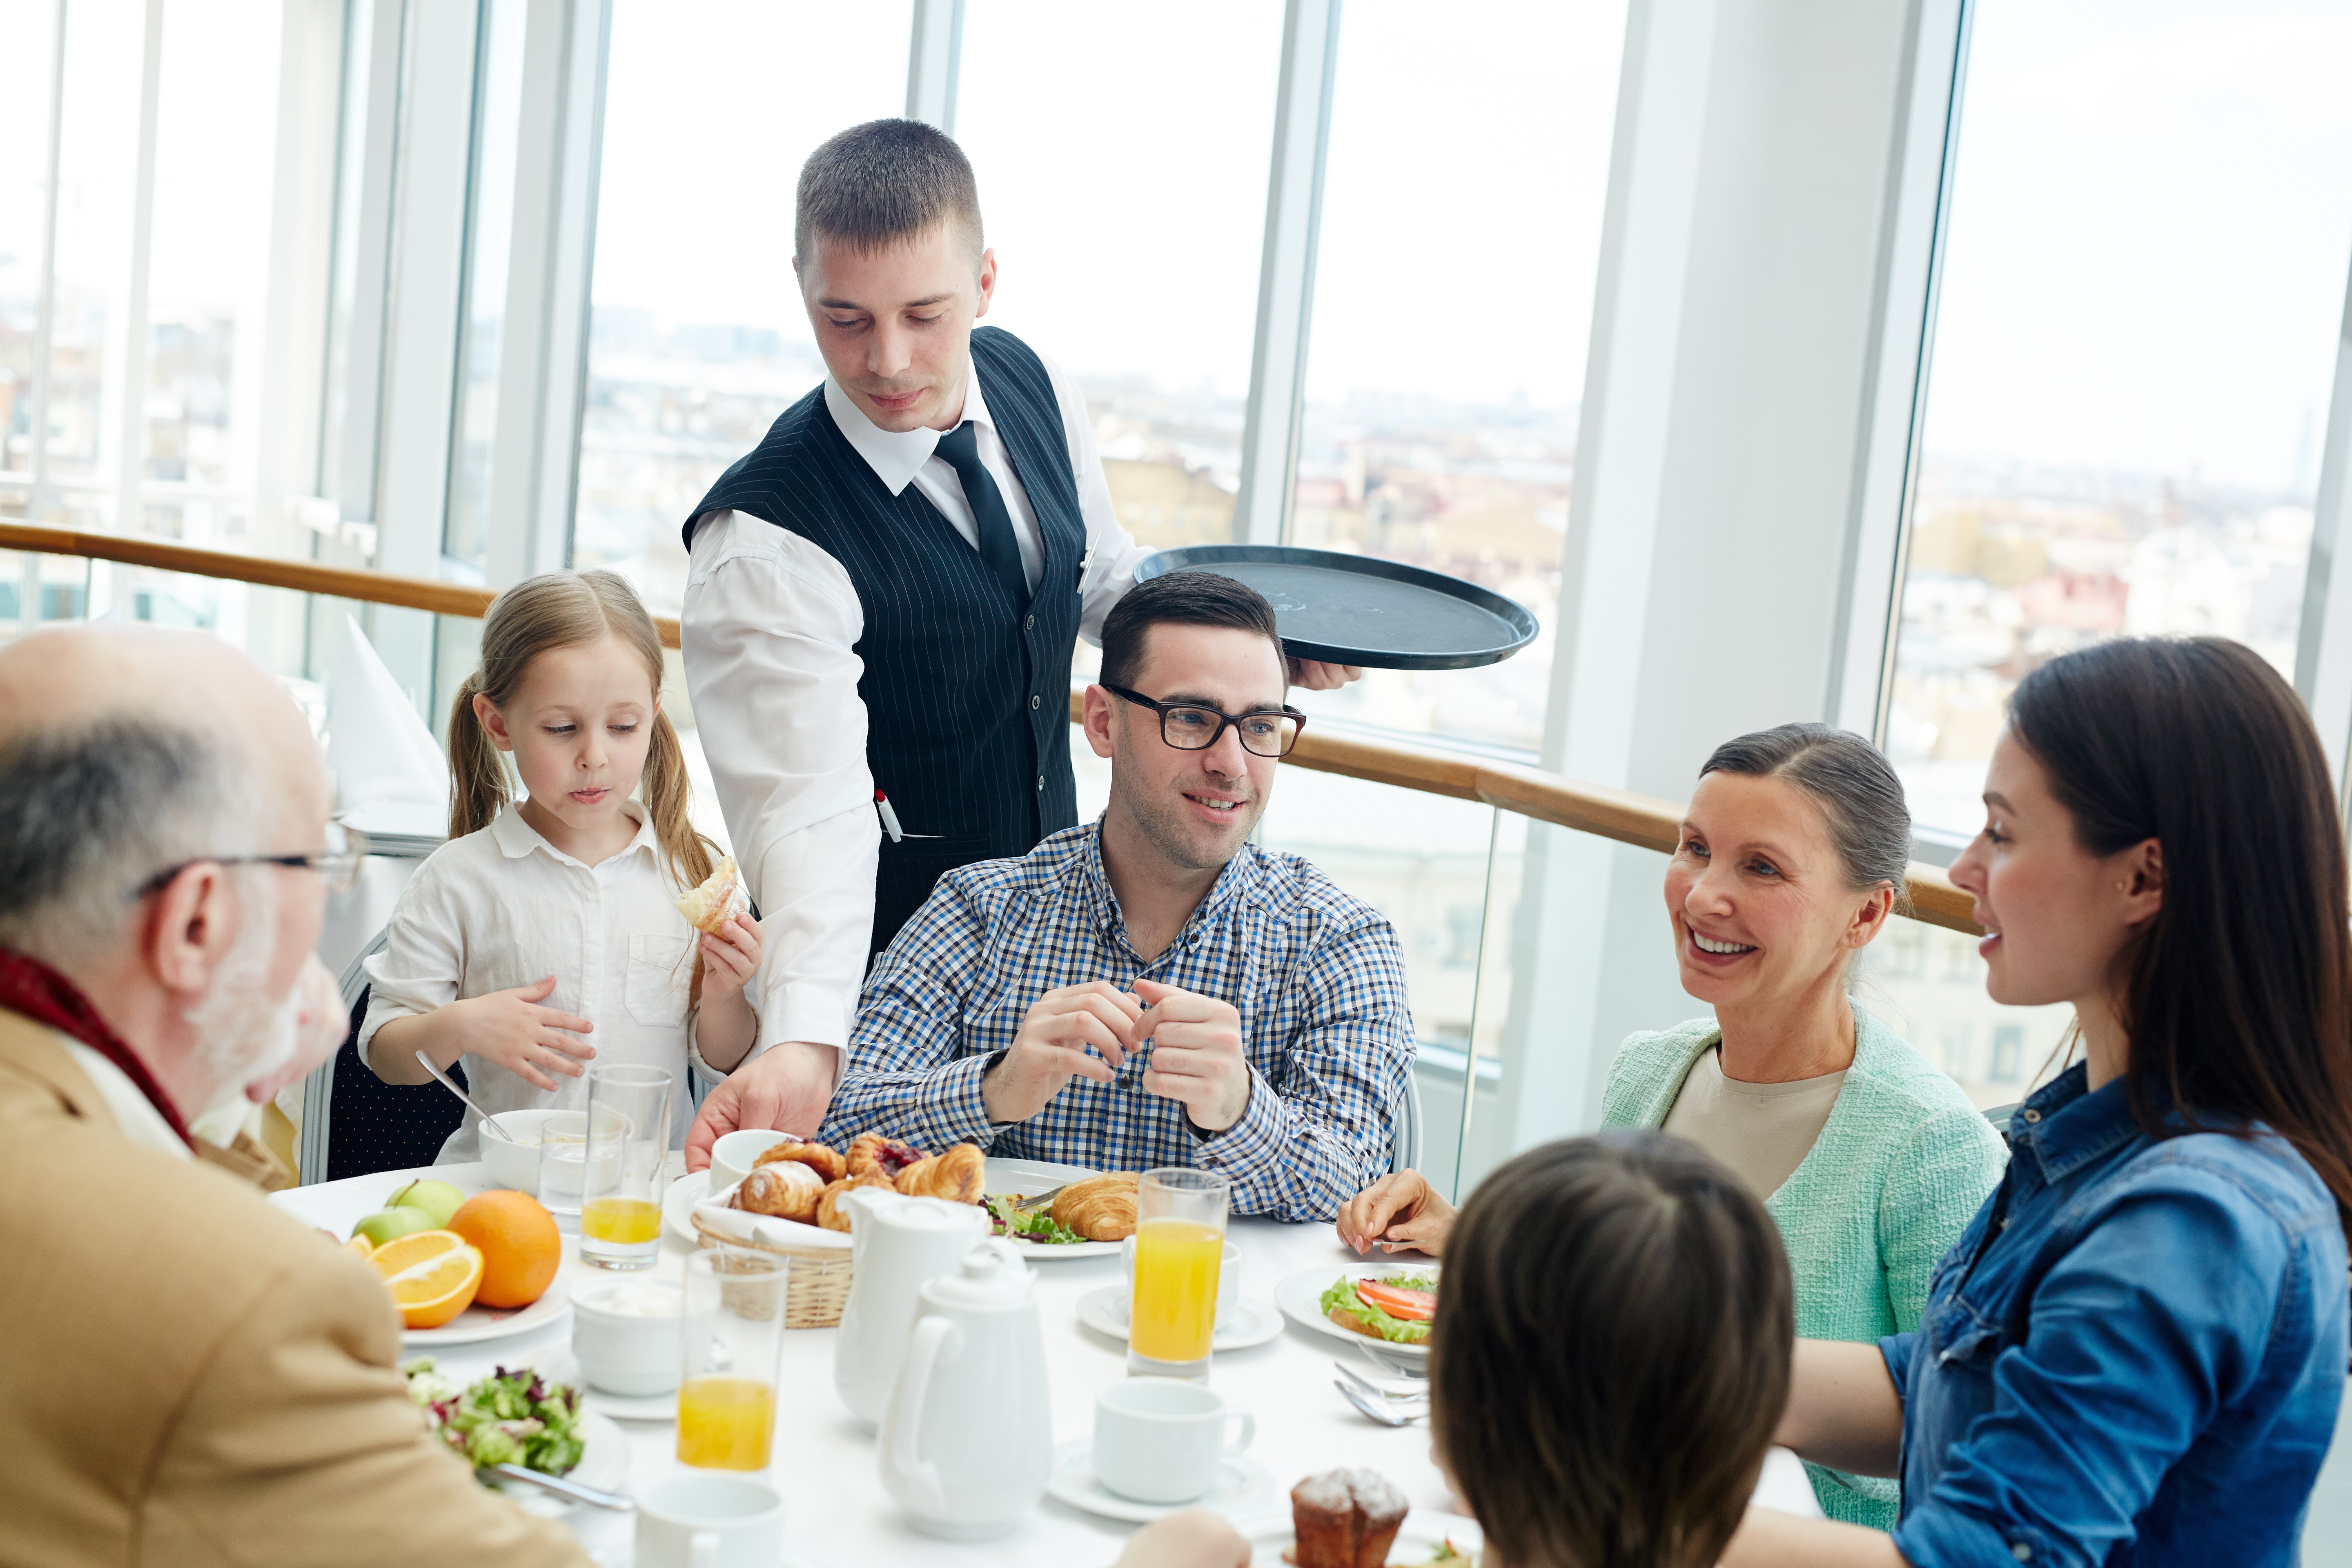 Family eating at a restaurant and waiter with tray